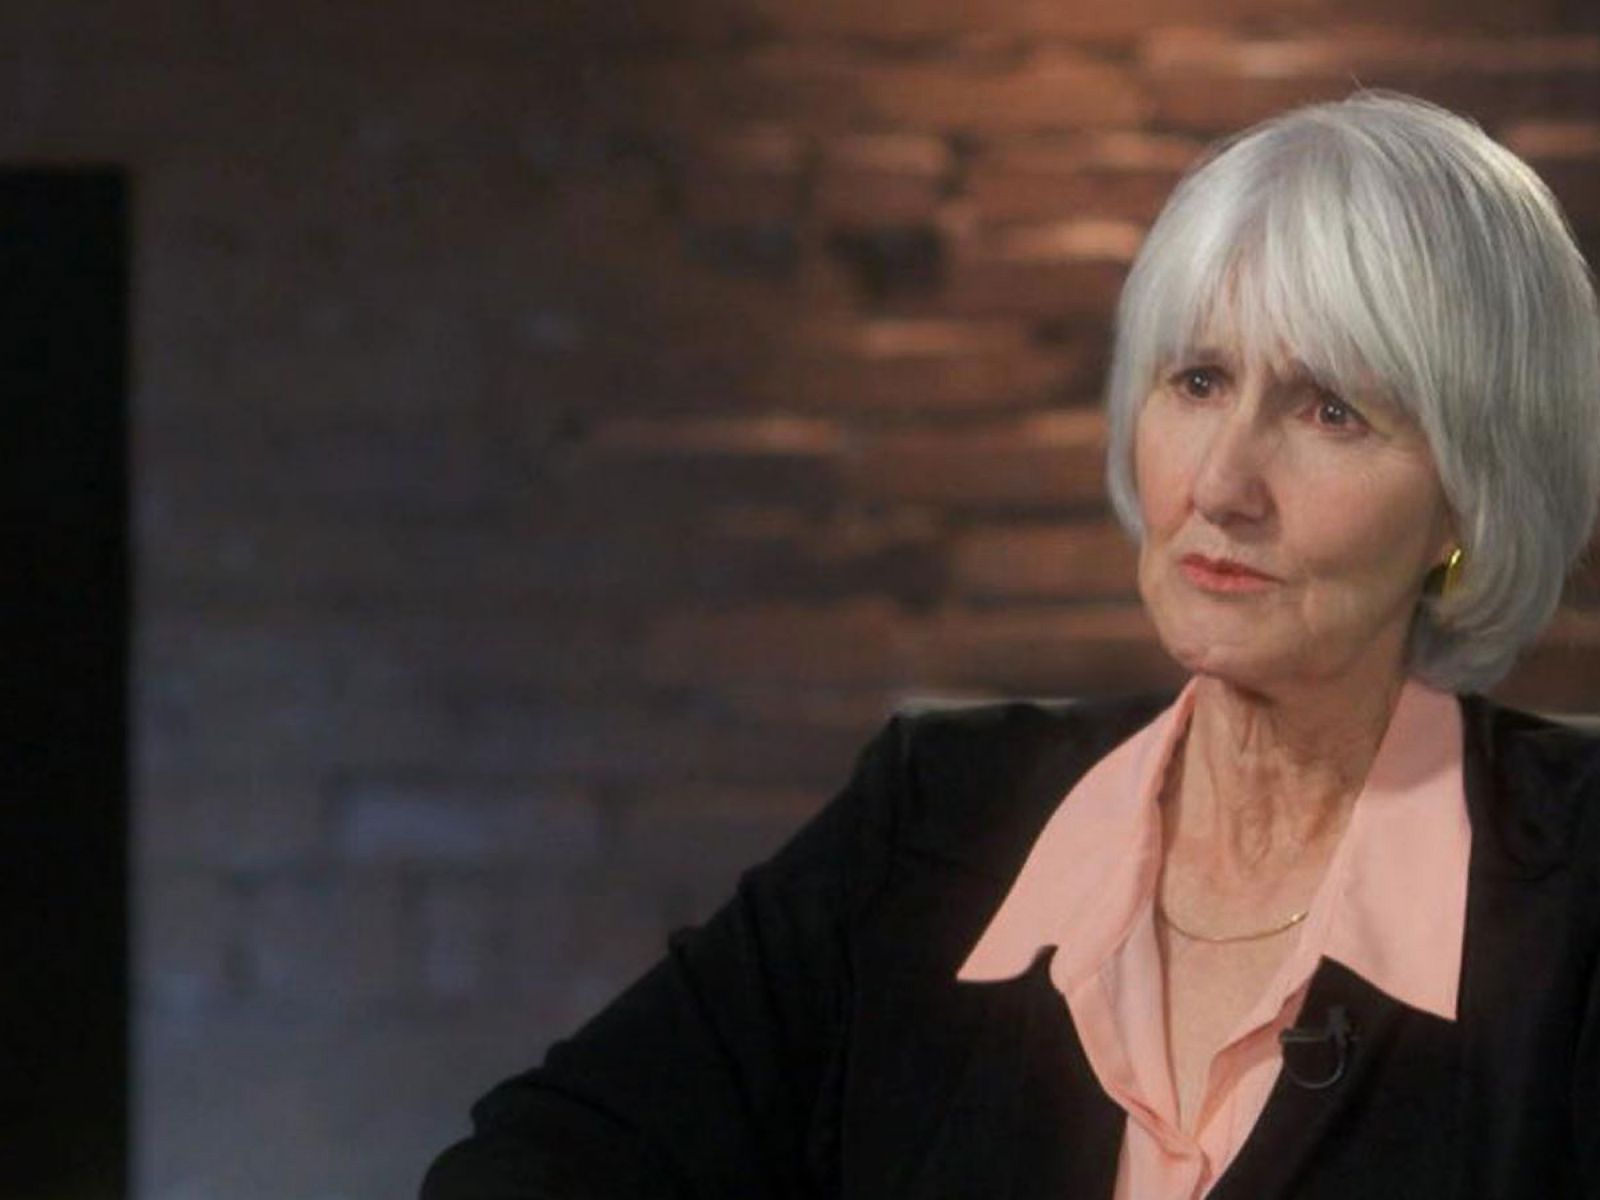 Sue Klebold Recalls What Her Son Dylan Was Like at Home: Part 2